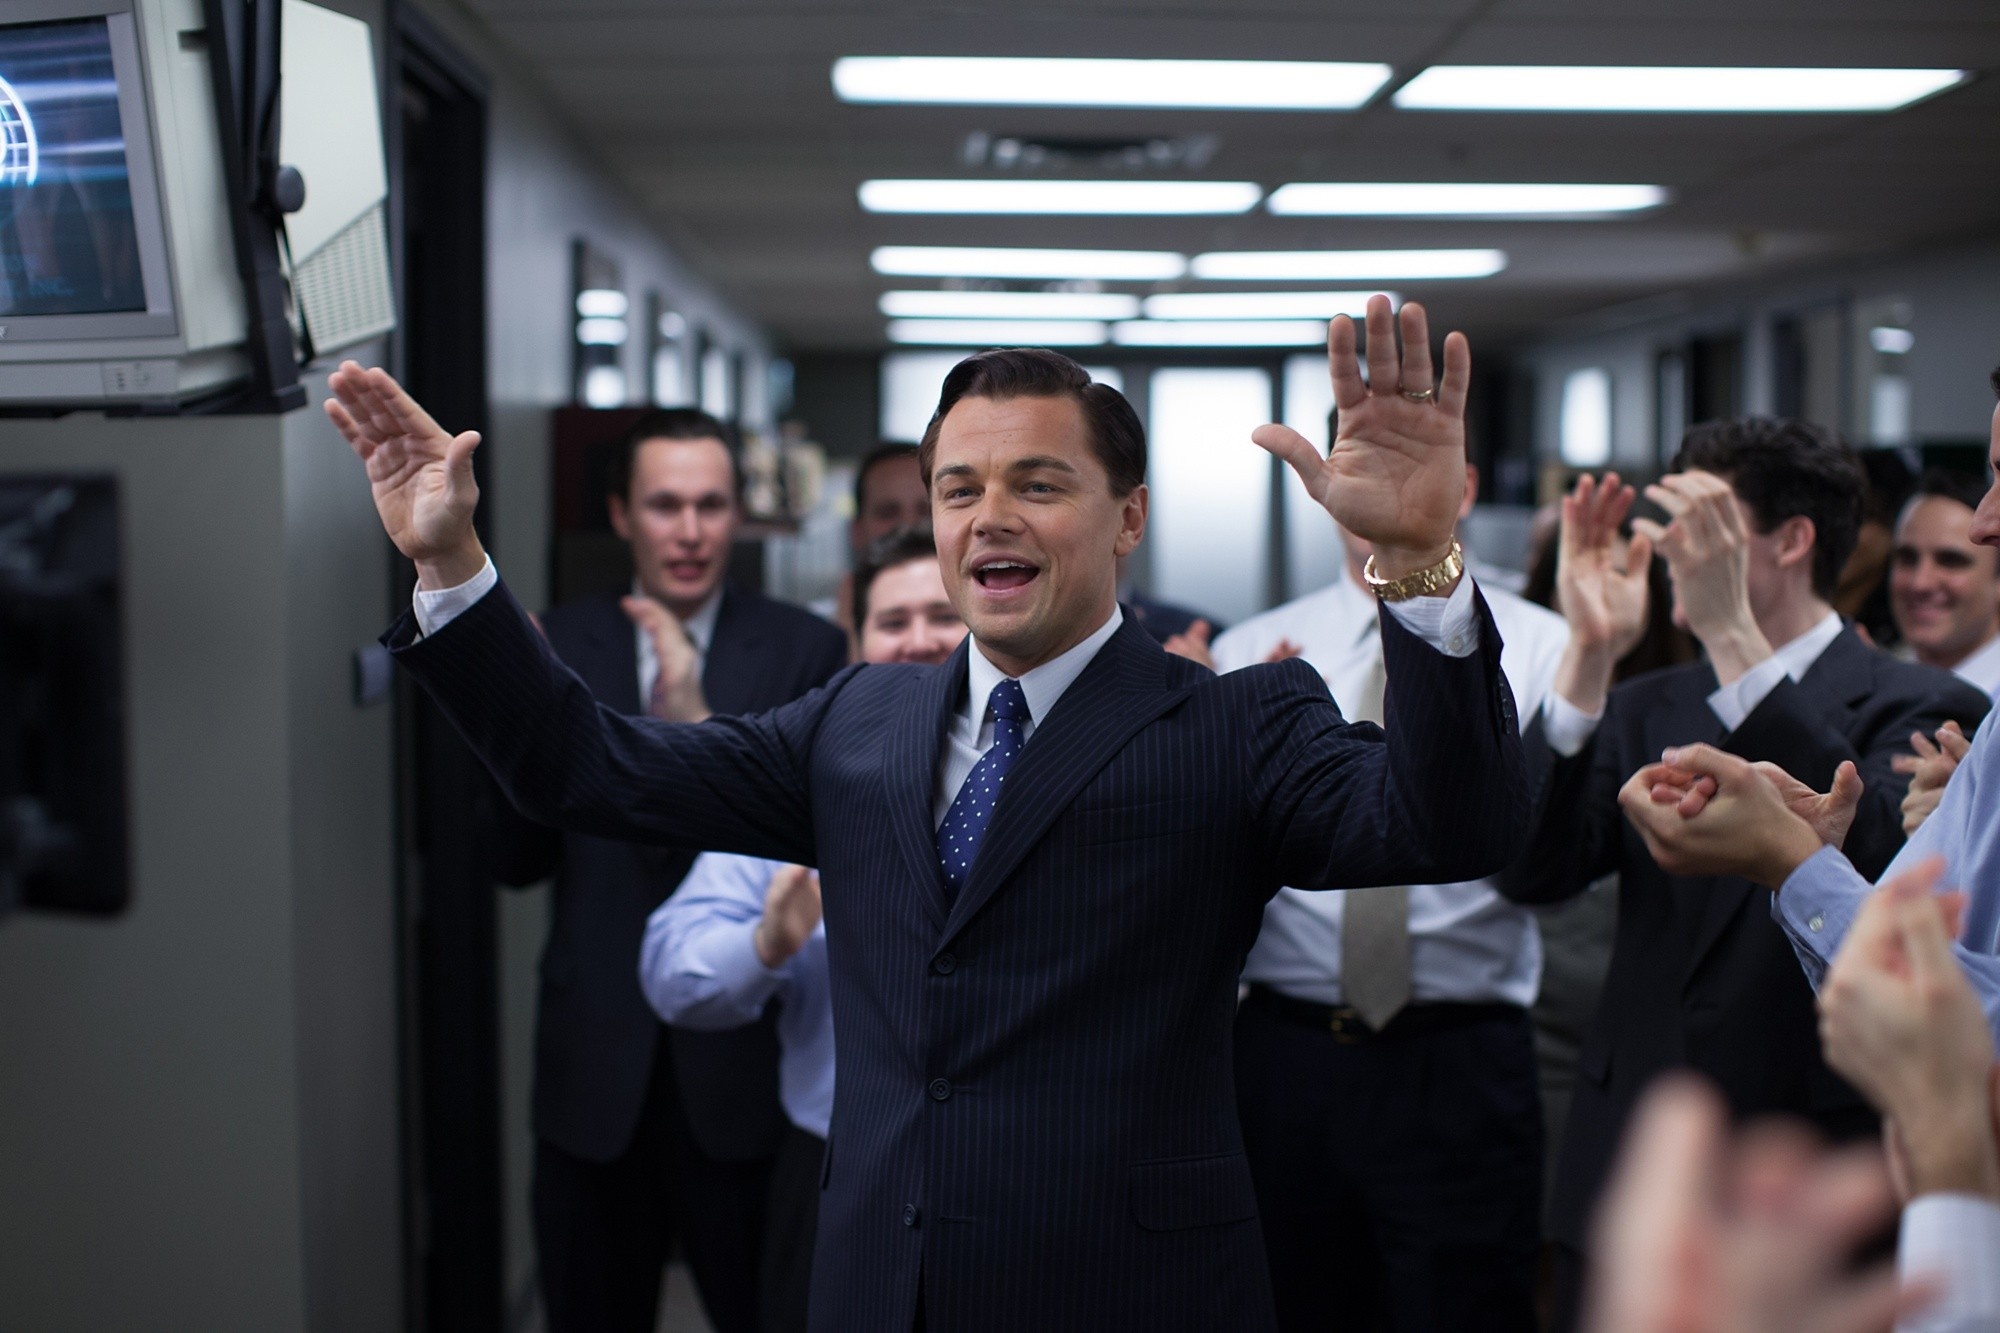 311817 2000x1333 desktop hd the wolf of wall street background image